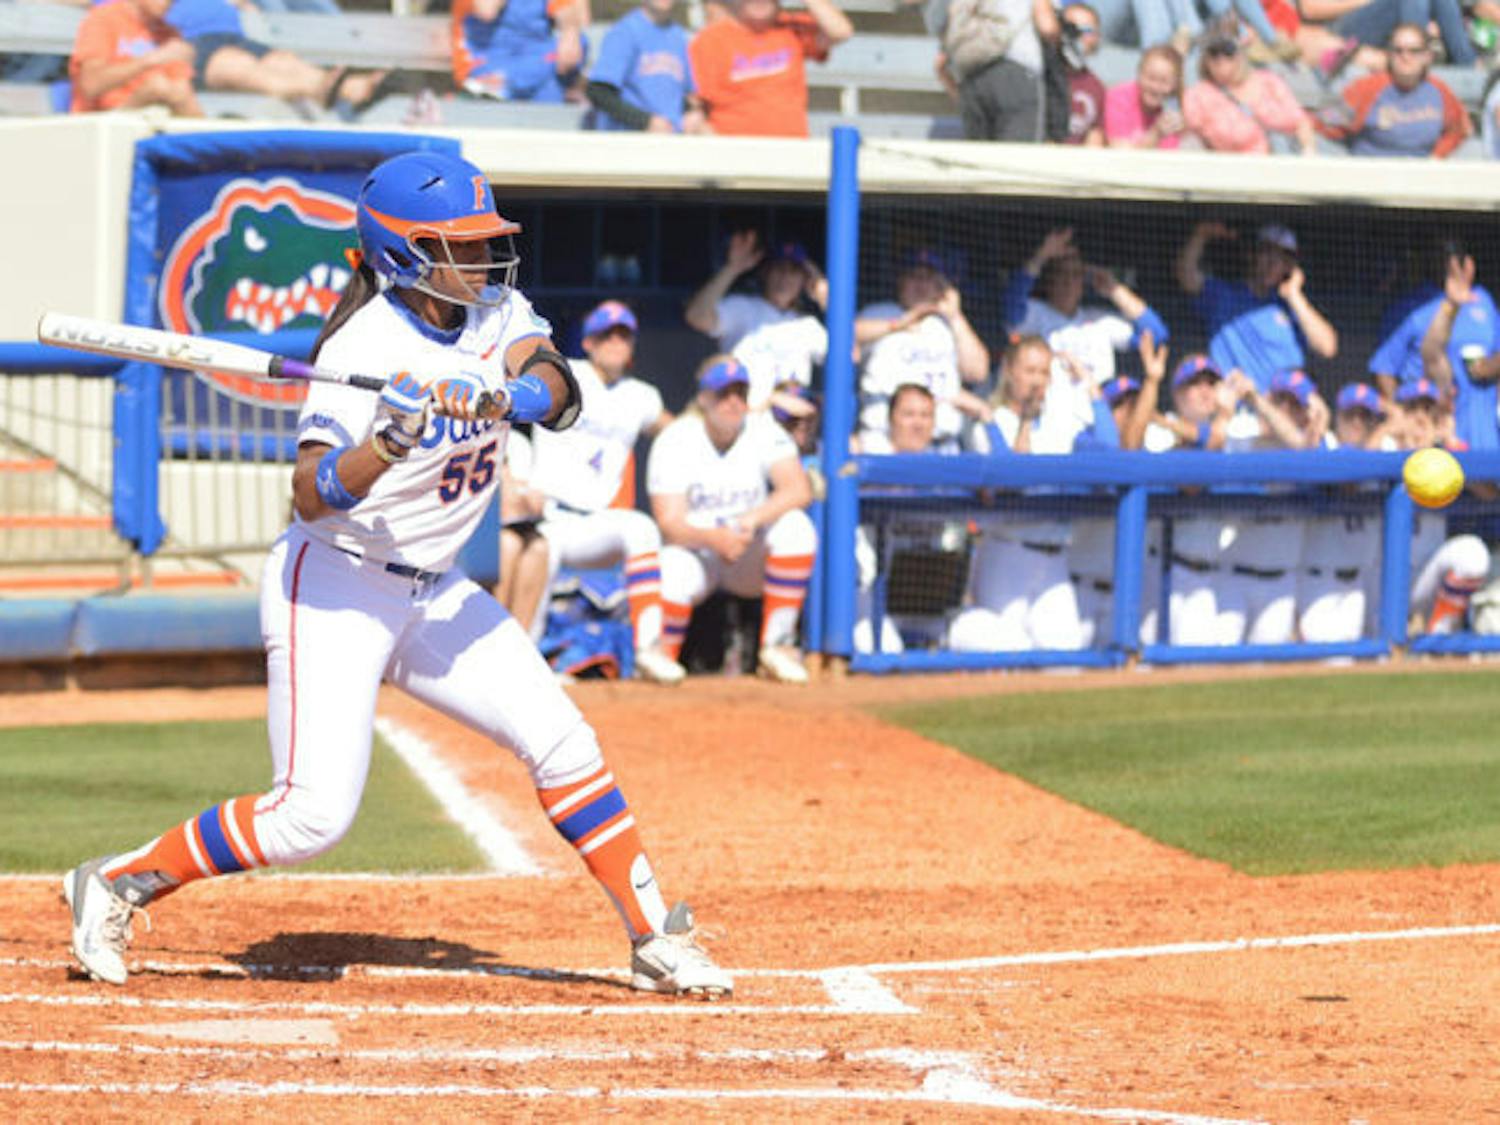 Briana Little bats during Florida’s 2-0 win against Ole Miss on March 9 at Katie Seashole Pressly Stadium. Little has hit well despite limited playing time this season.